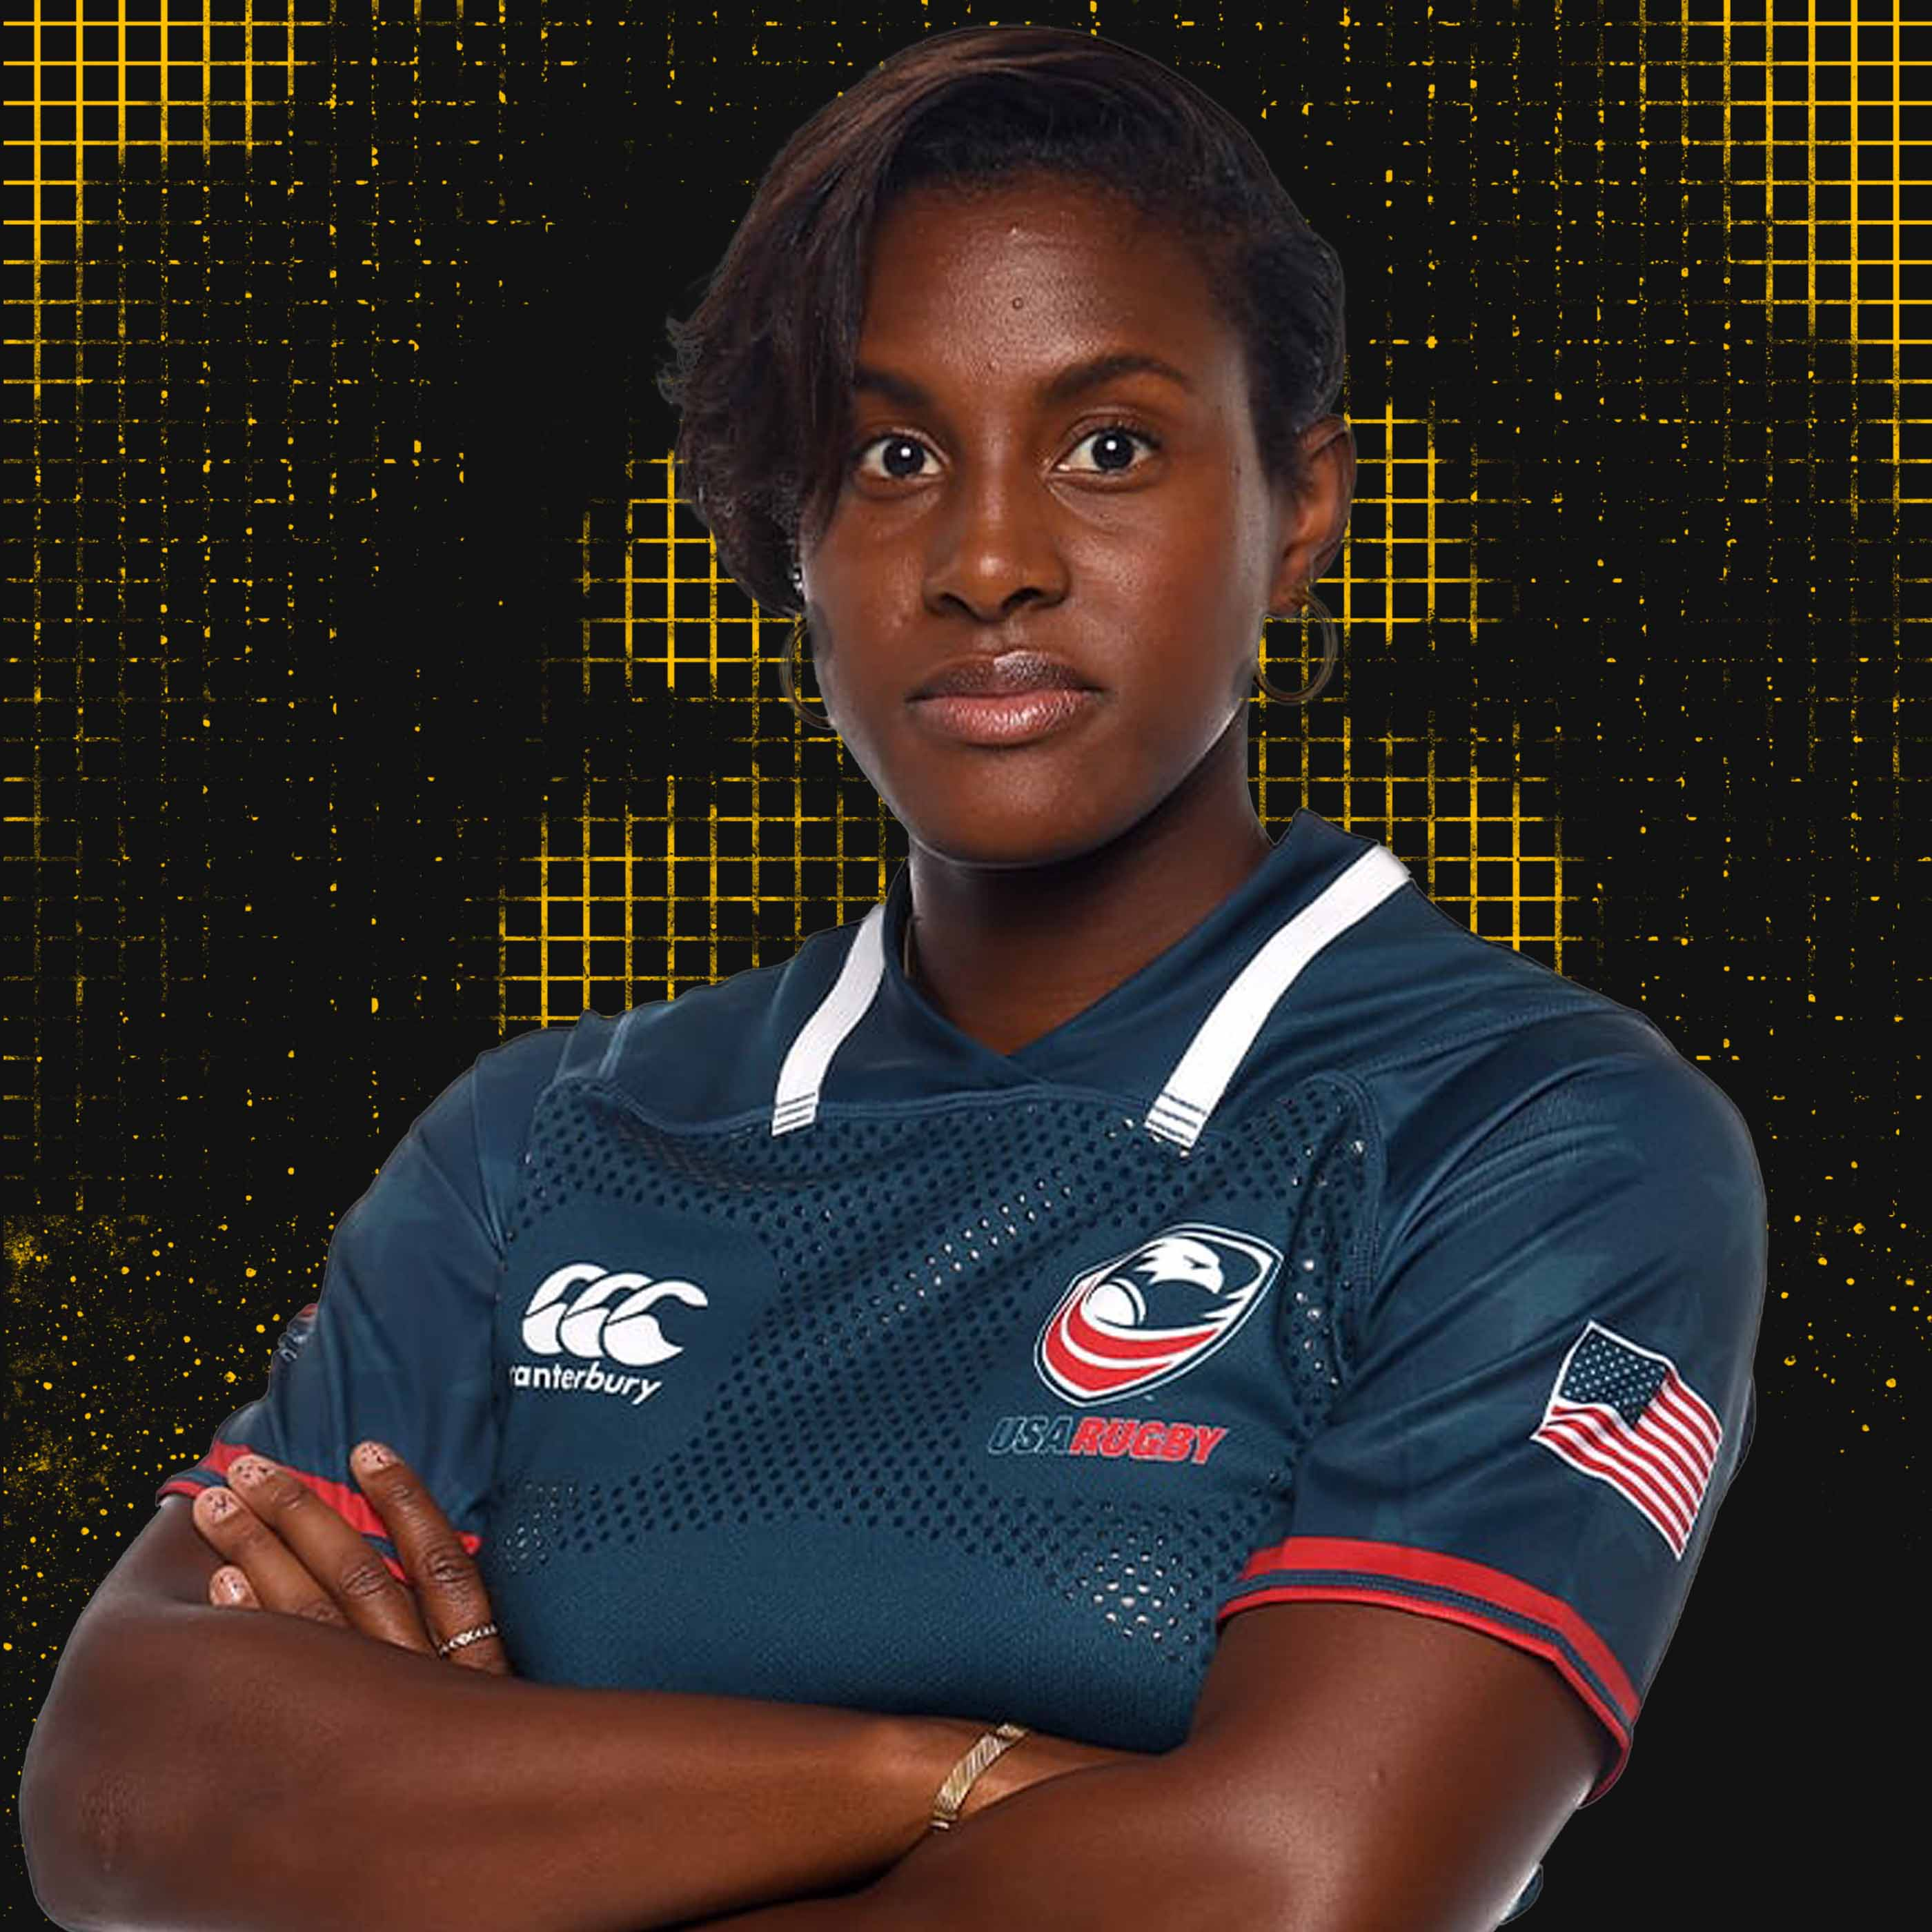 Olympic Level Mental Performance: Captain of Women’s Rugby Sevens Team USA, Naya Tapper 